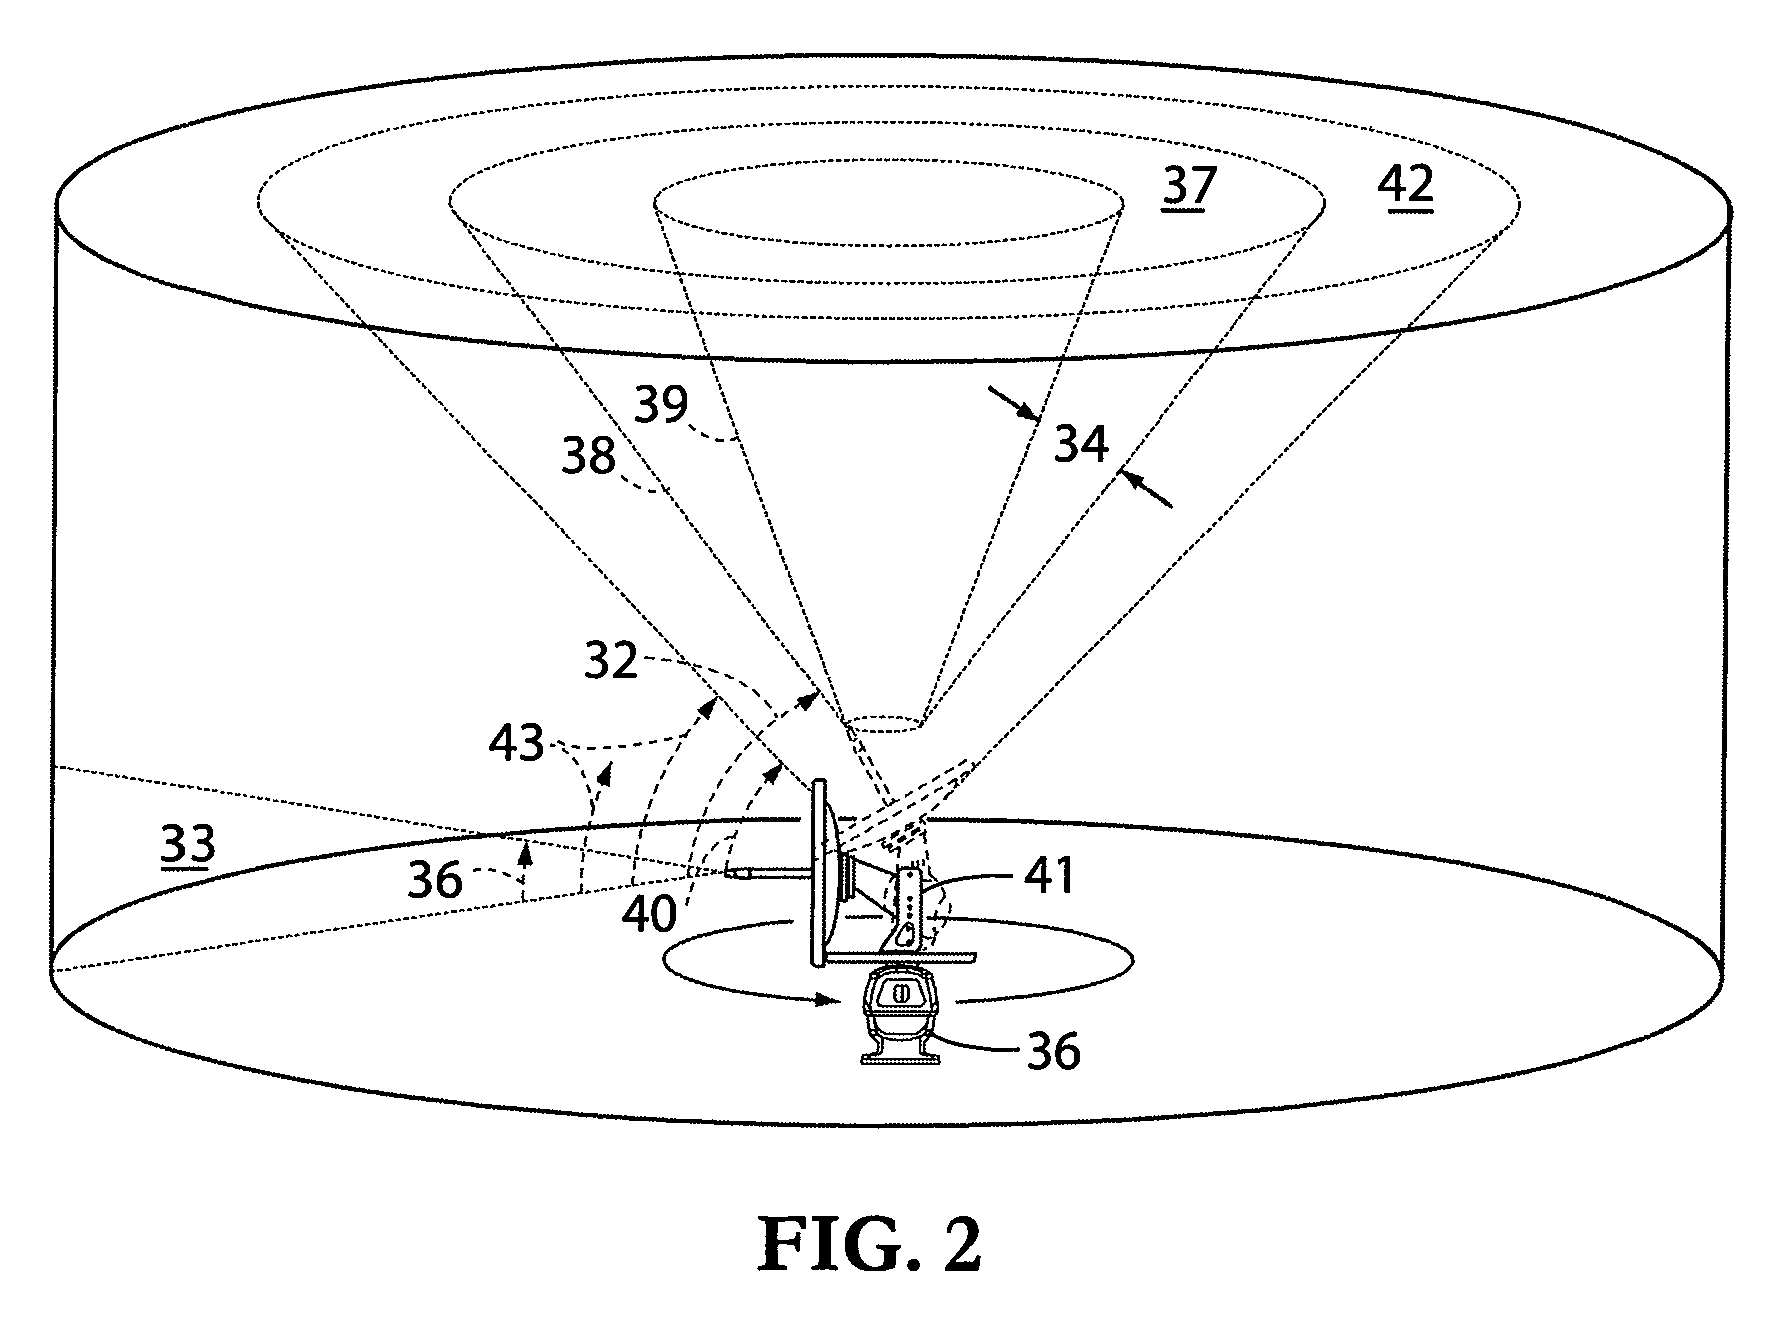 Device and method for 3D sampling with avian radar